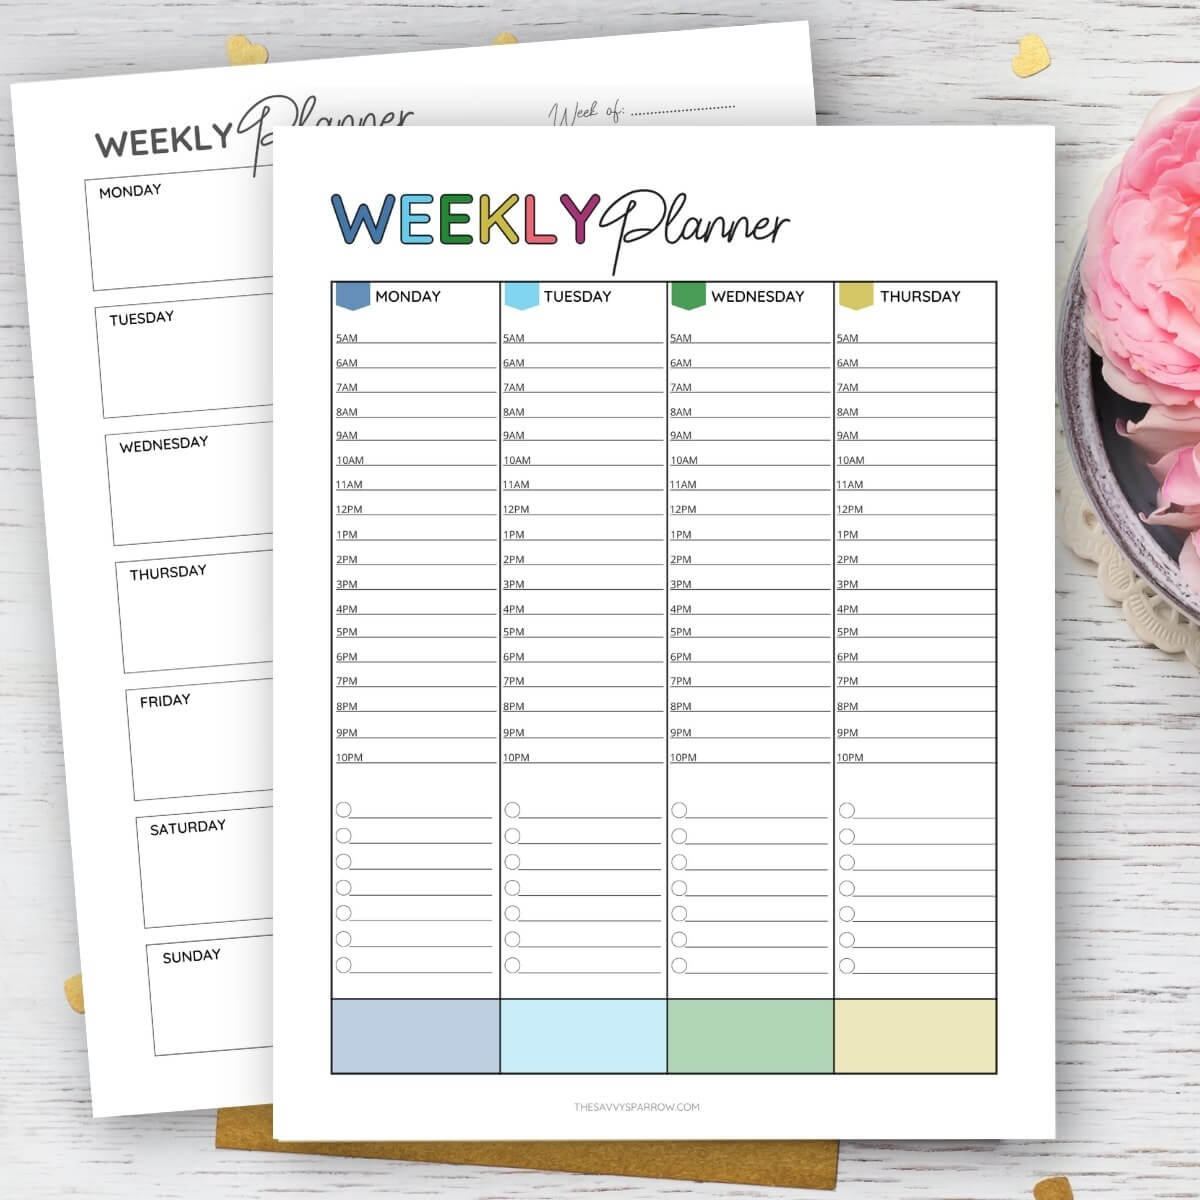 Weekly Planner Printable PDF Mail napmexico mx